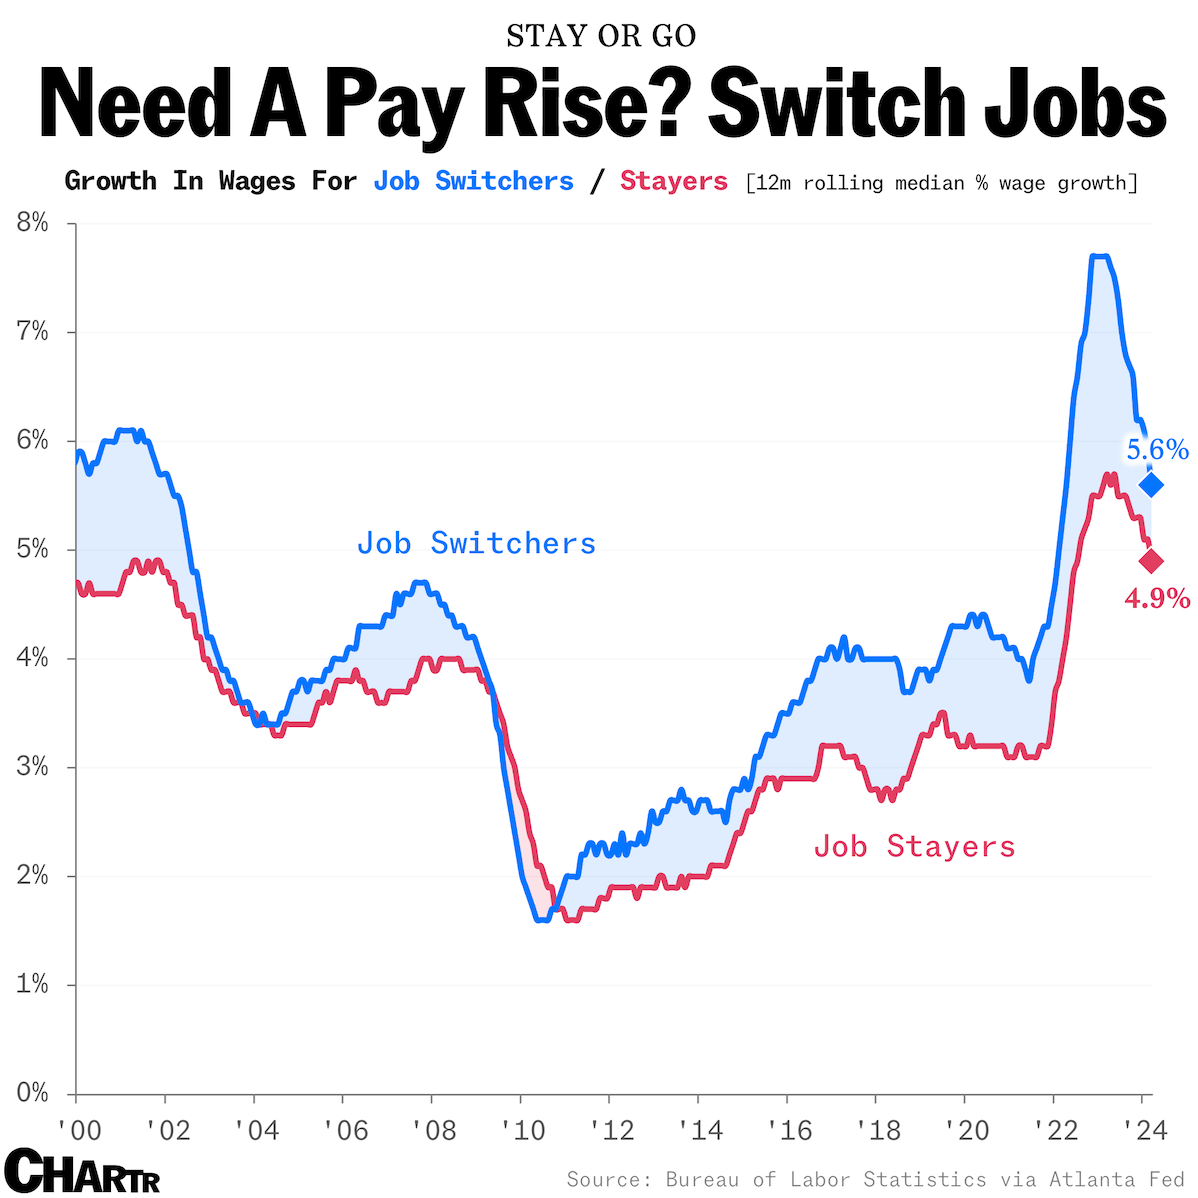 Job switchers and stayers